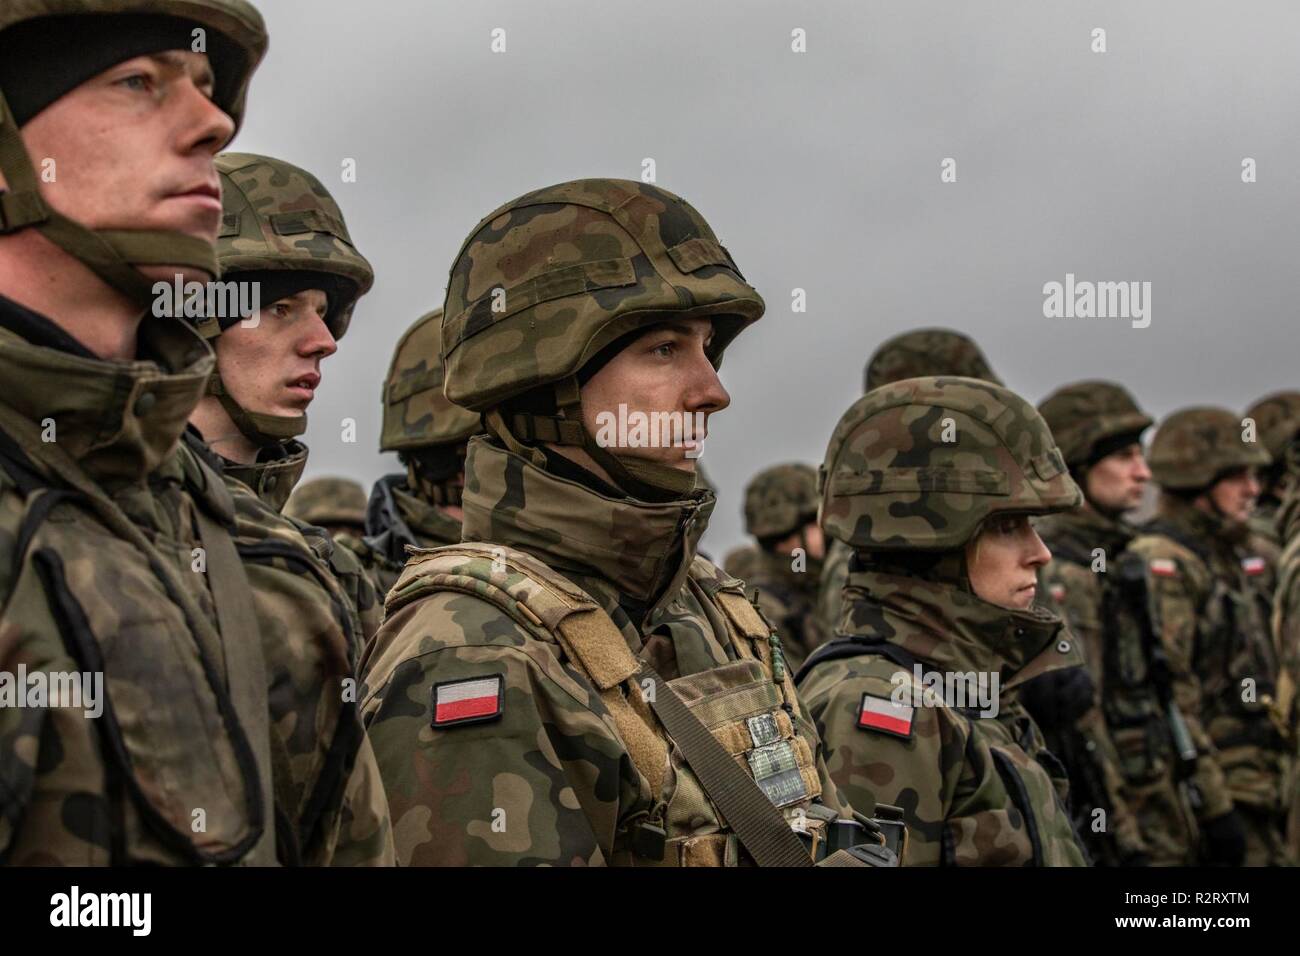 A Polish Soldier assigned to Battle Group Poland stands at the position of  attention during the